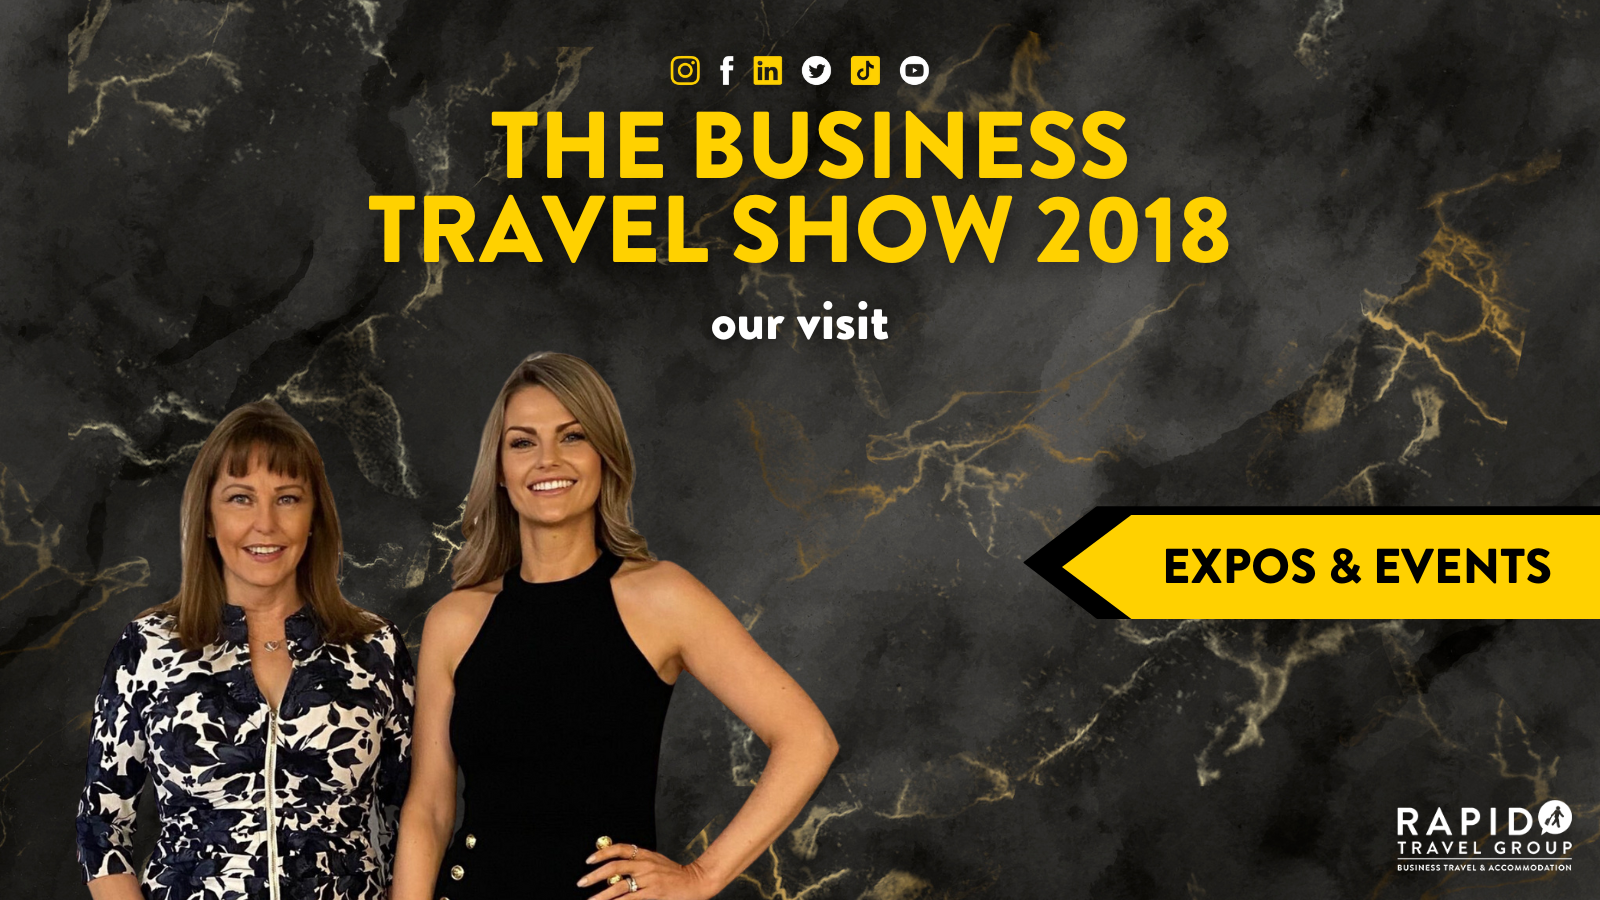 The Business Travel Show 2018